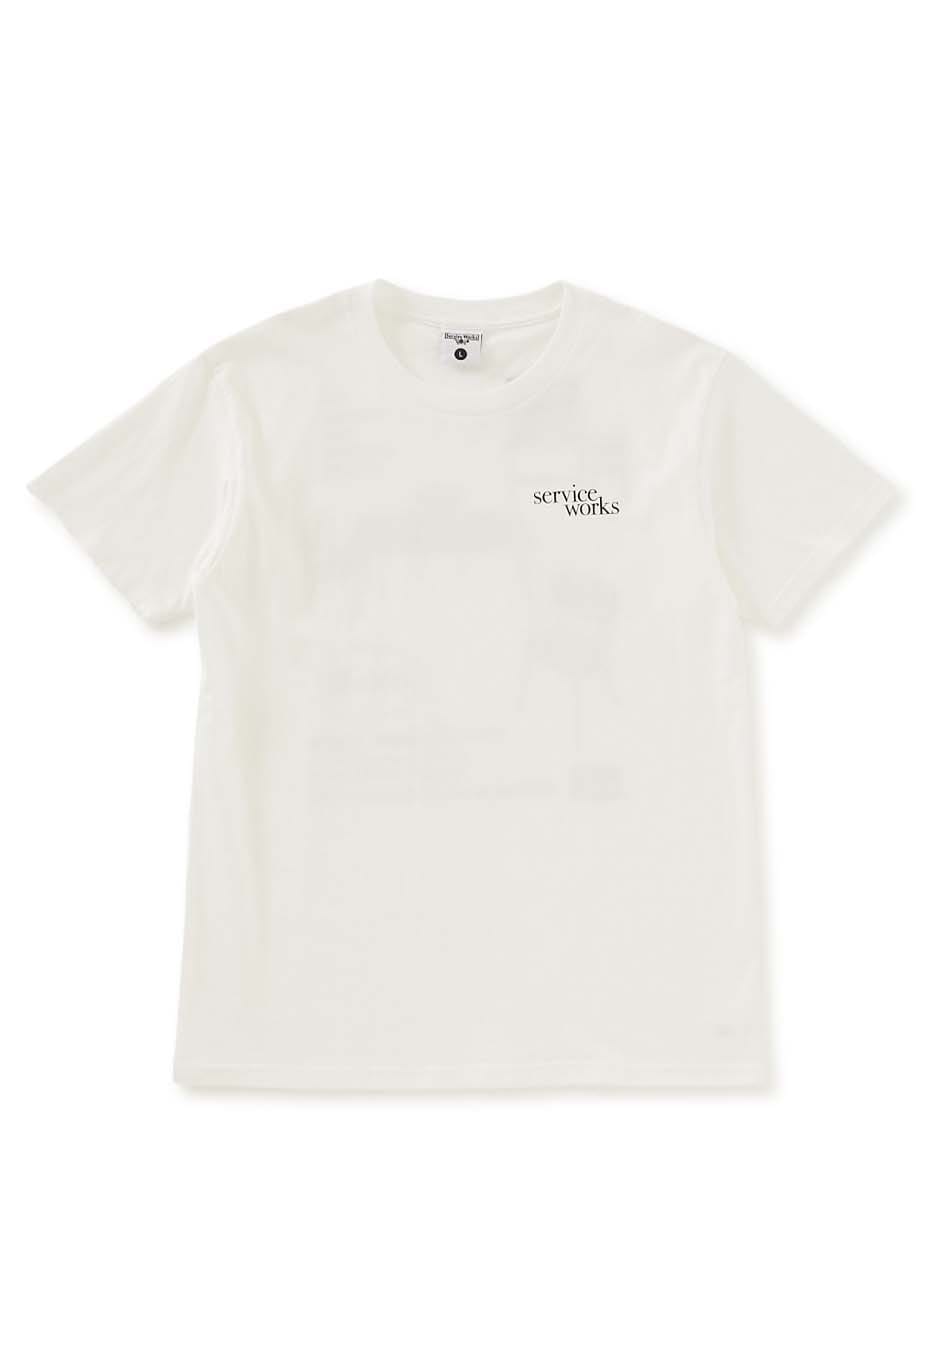 SERVICE WORKS /DINING SET Tシャツ